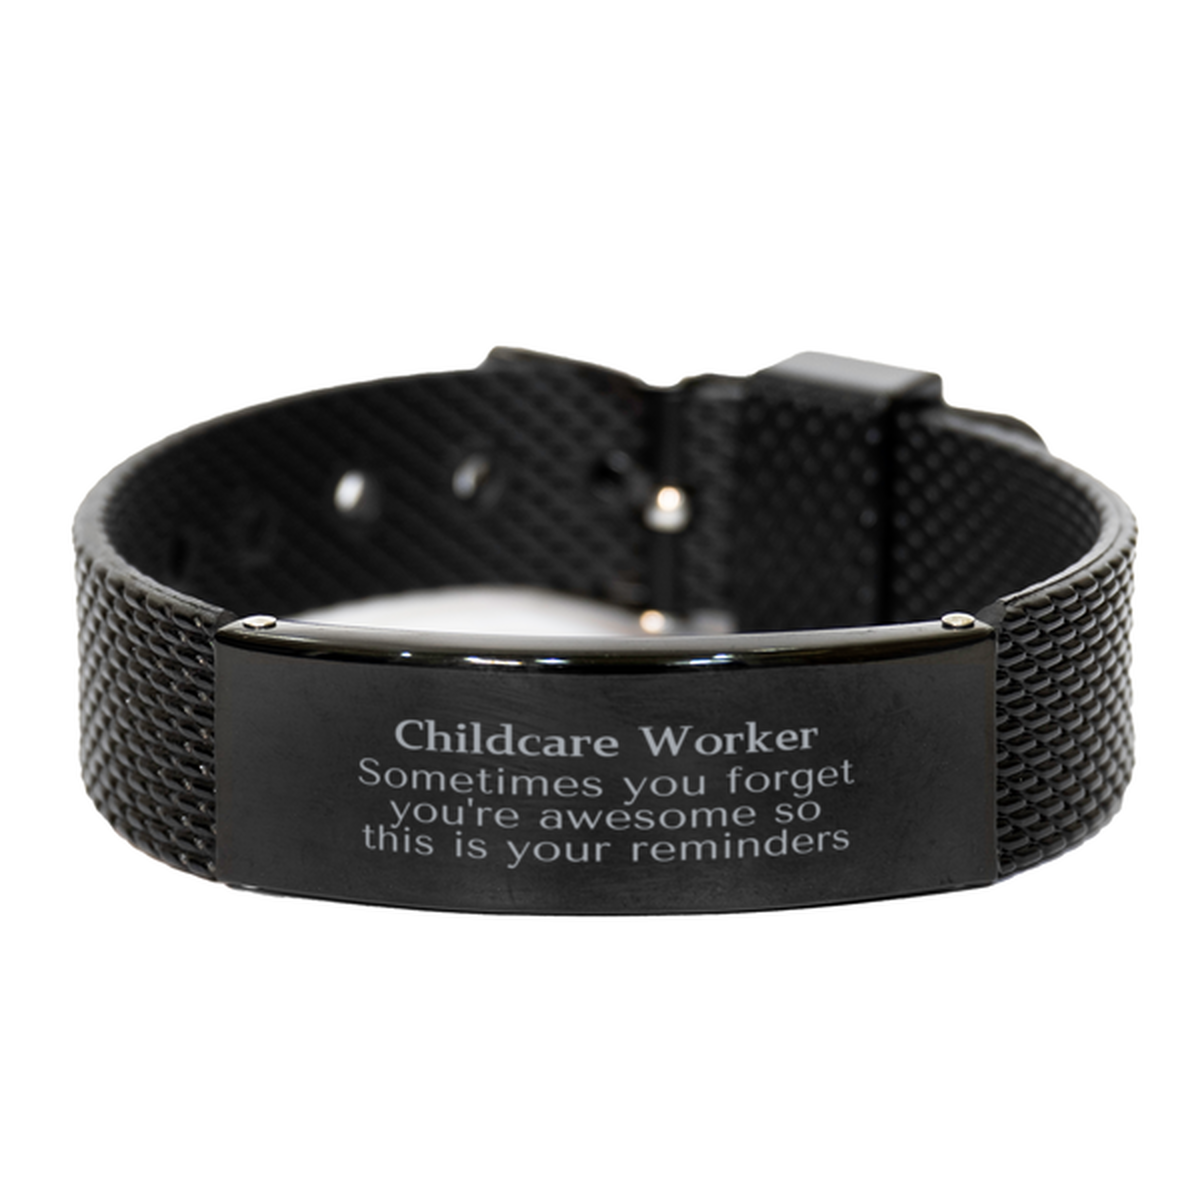 Sentimental Childcare Worker Black Shark Mesh Bracelet, Childcare Worker Sometimes you forget you're awesome so this is your reminders, Graduation Christmas Birthday Gifts for Childcare Worker, Men, Women, Coworkers